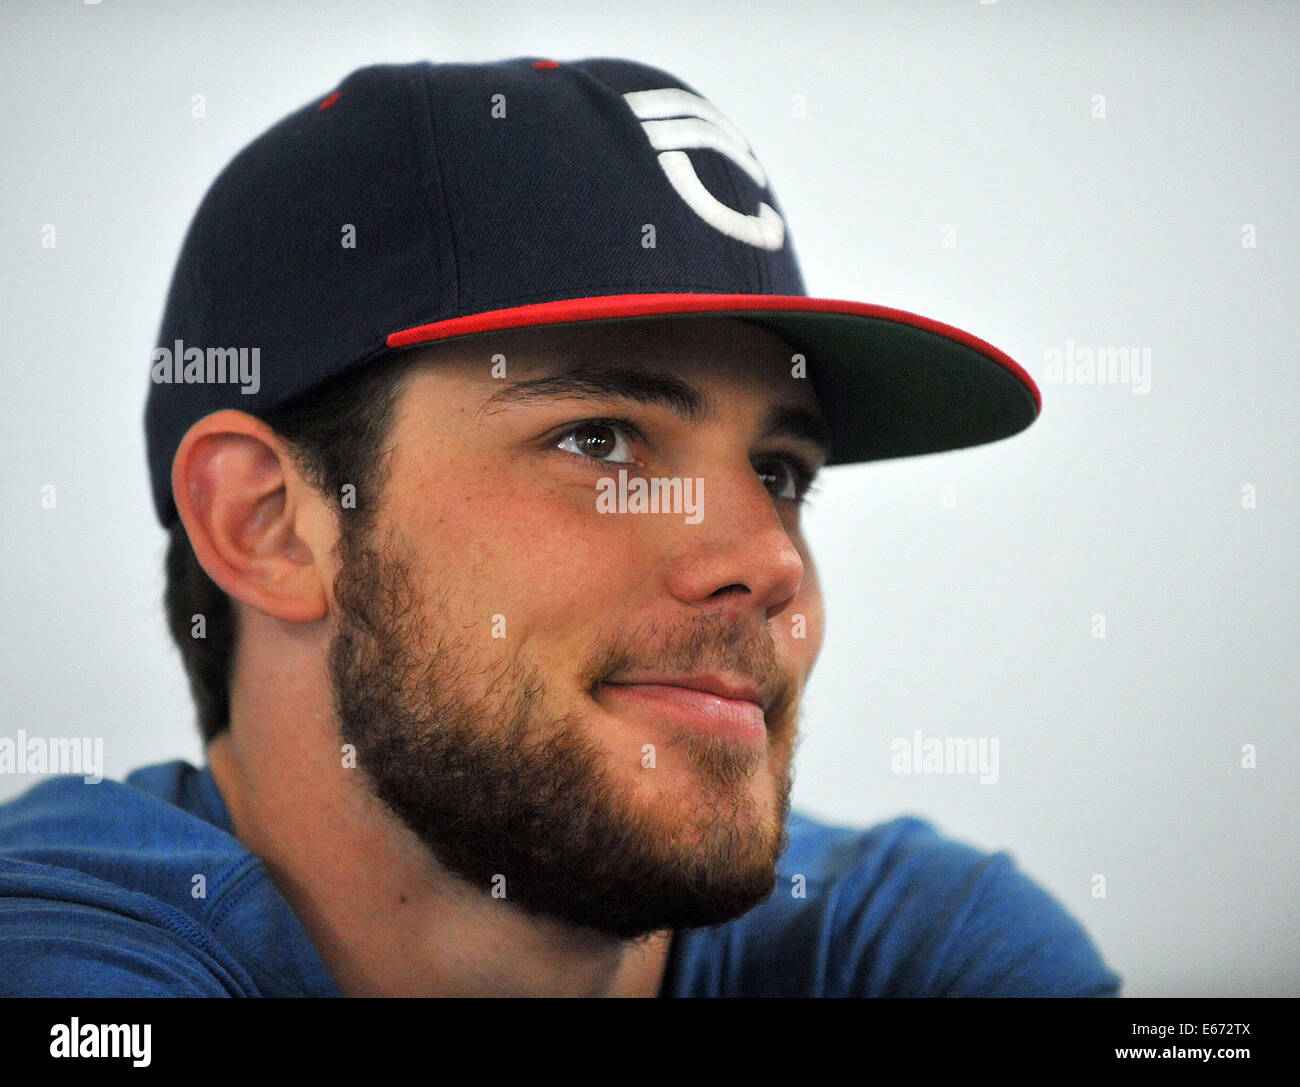 8,756 Tyler Seguin Photos & High Res Pictures - Getty Images